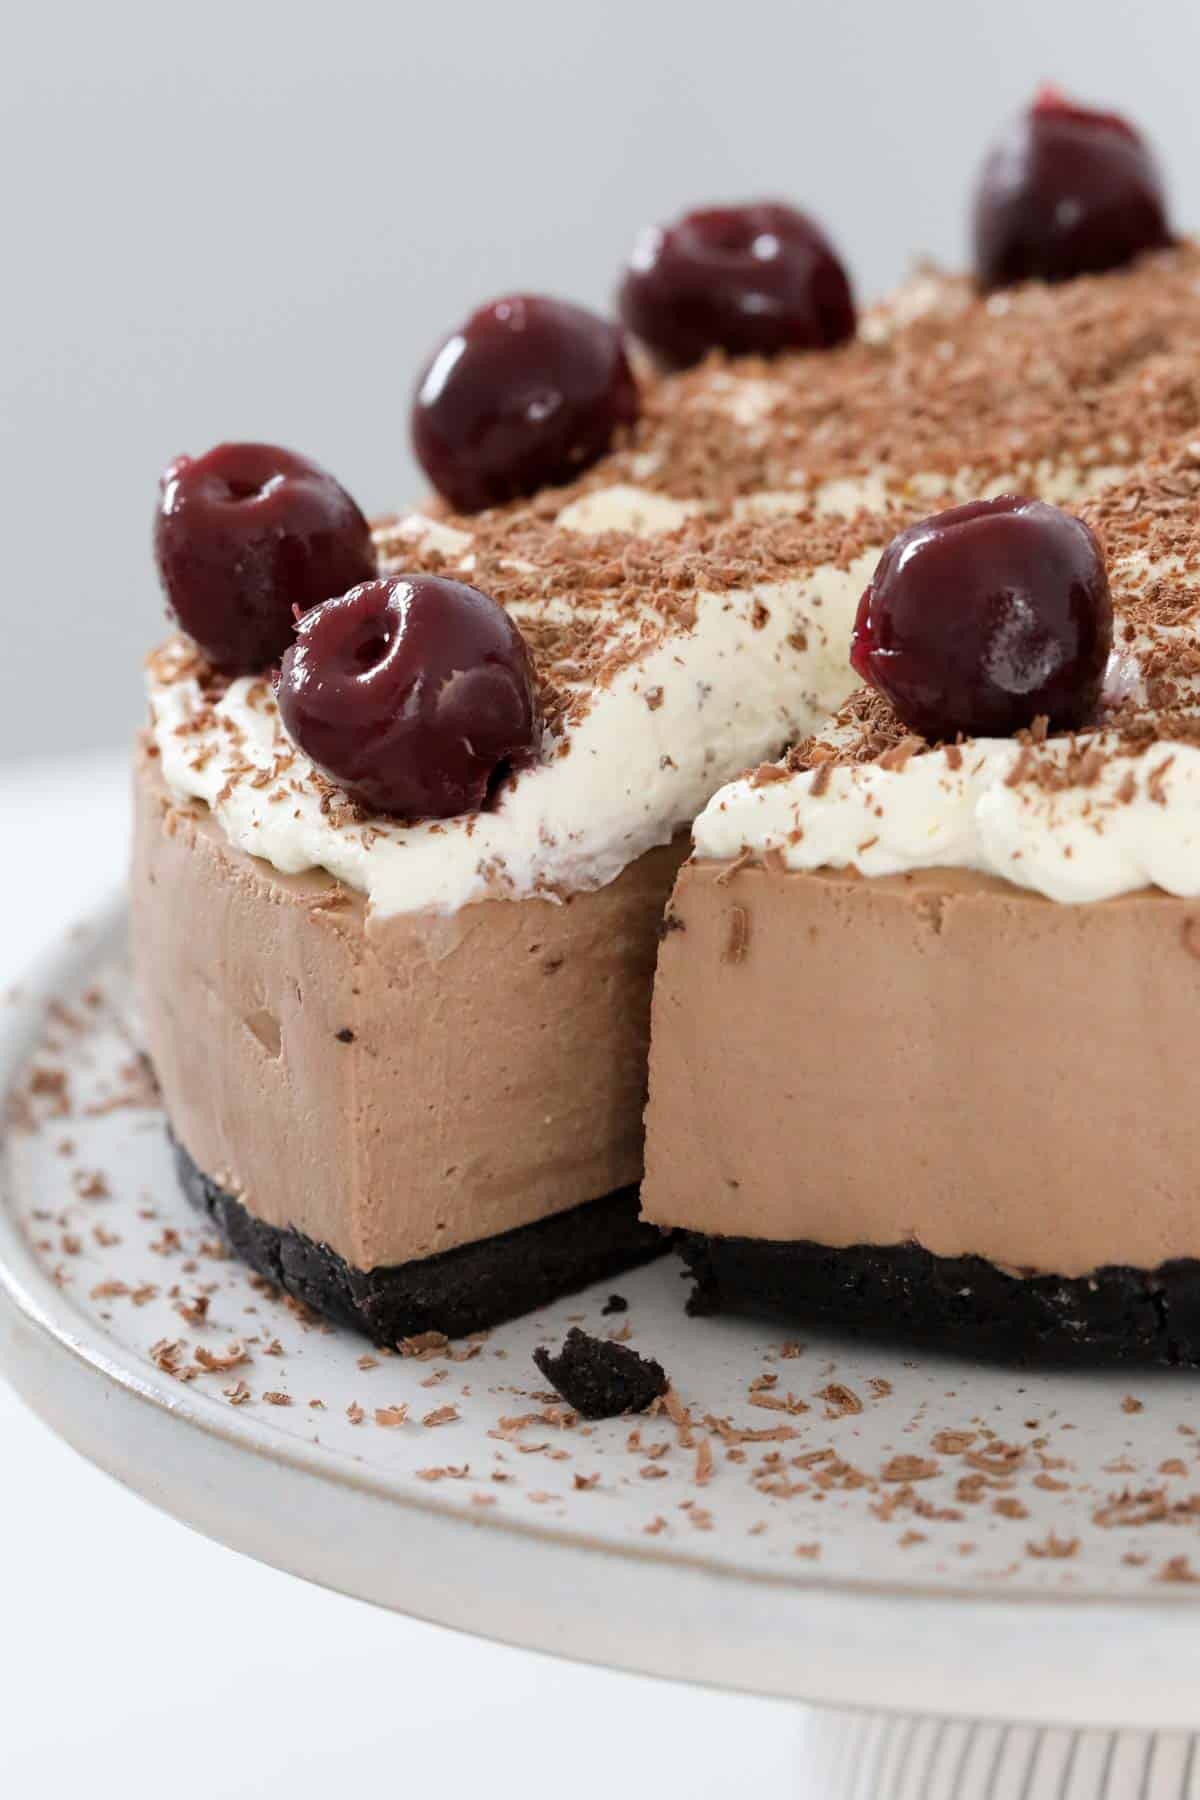 A Black Forest cjheesecake with one serve cut and slightly removed from the rest.